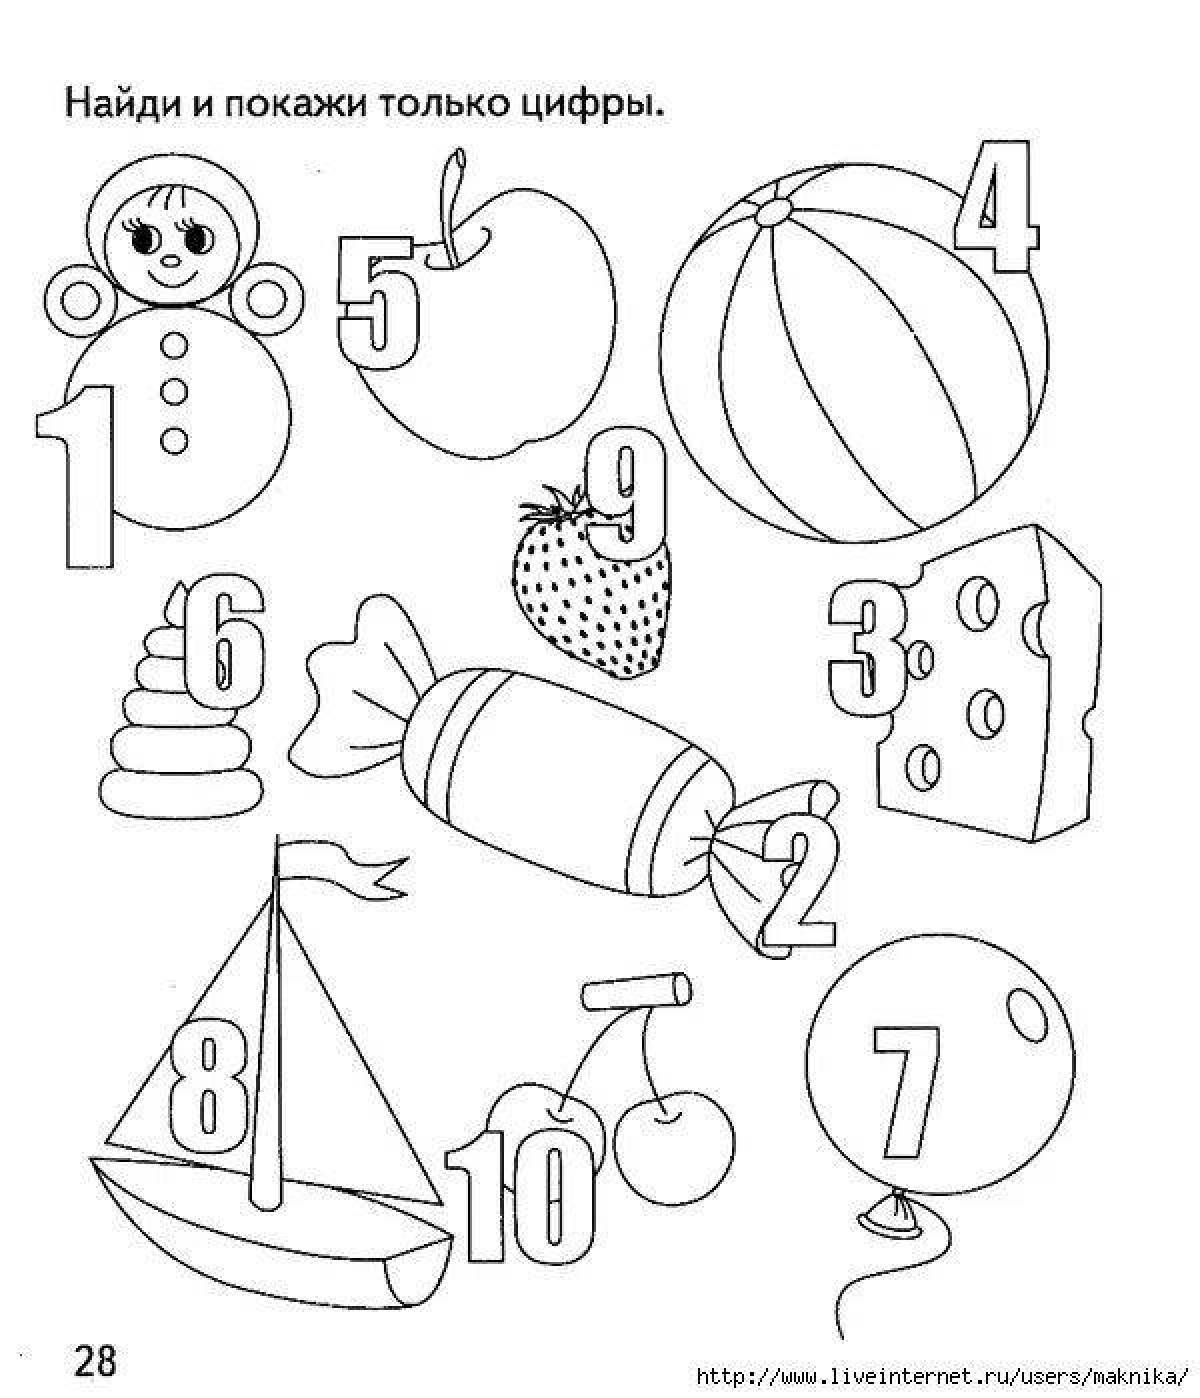 Unforgettable math coloring book for kids 4-5 years old